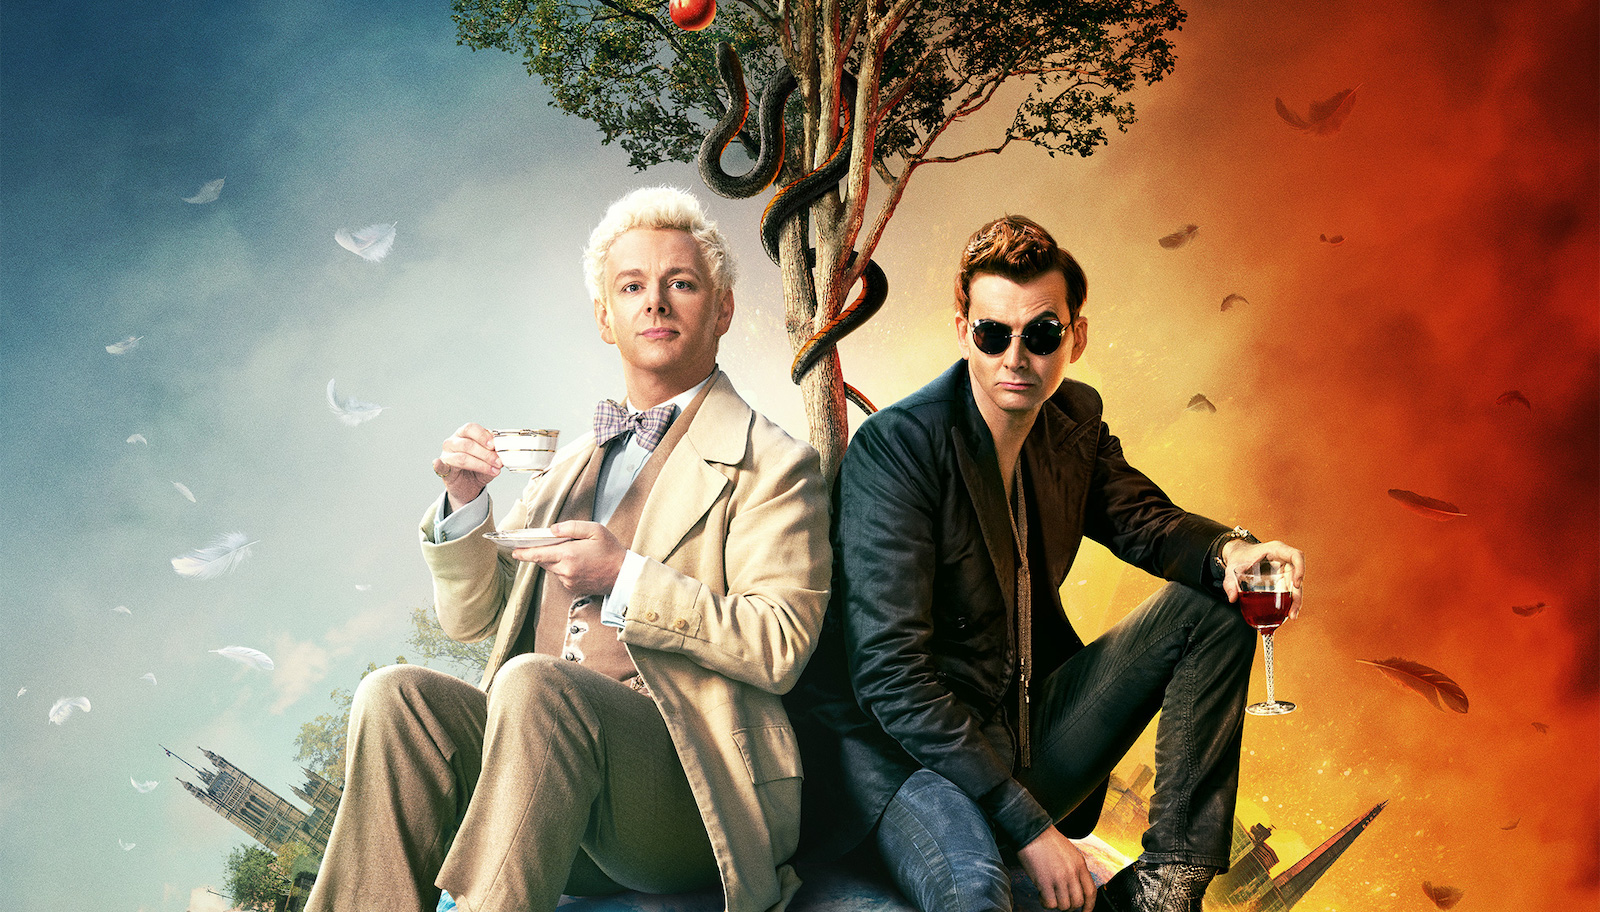 What Will Good Omens Season 2 Be About?